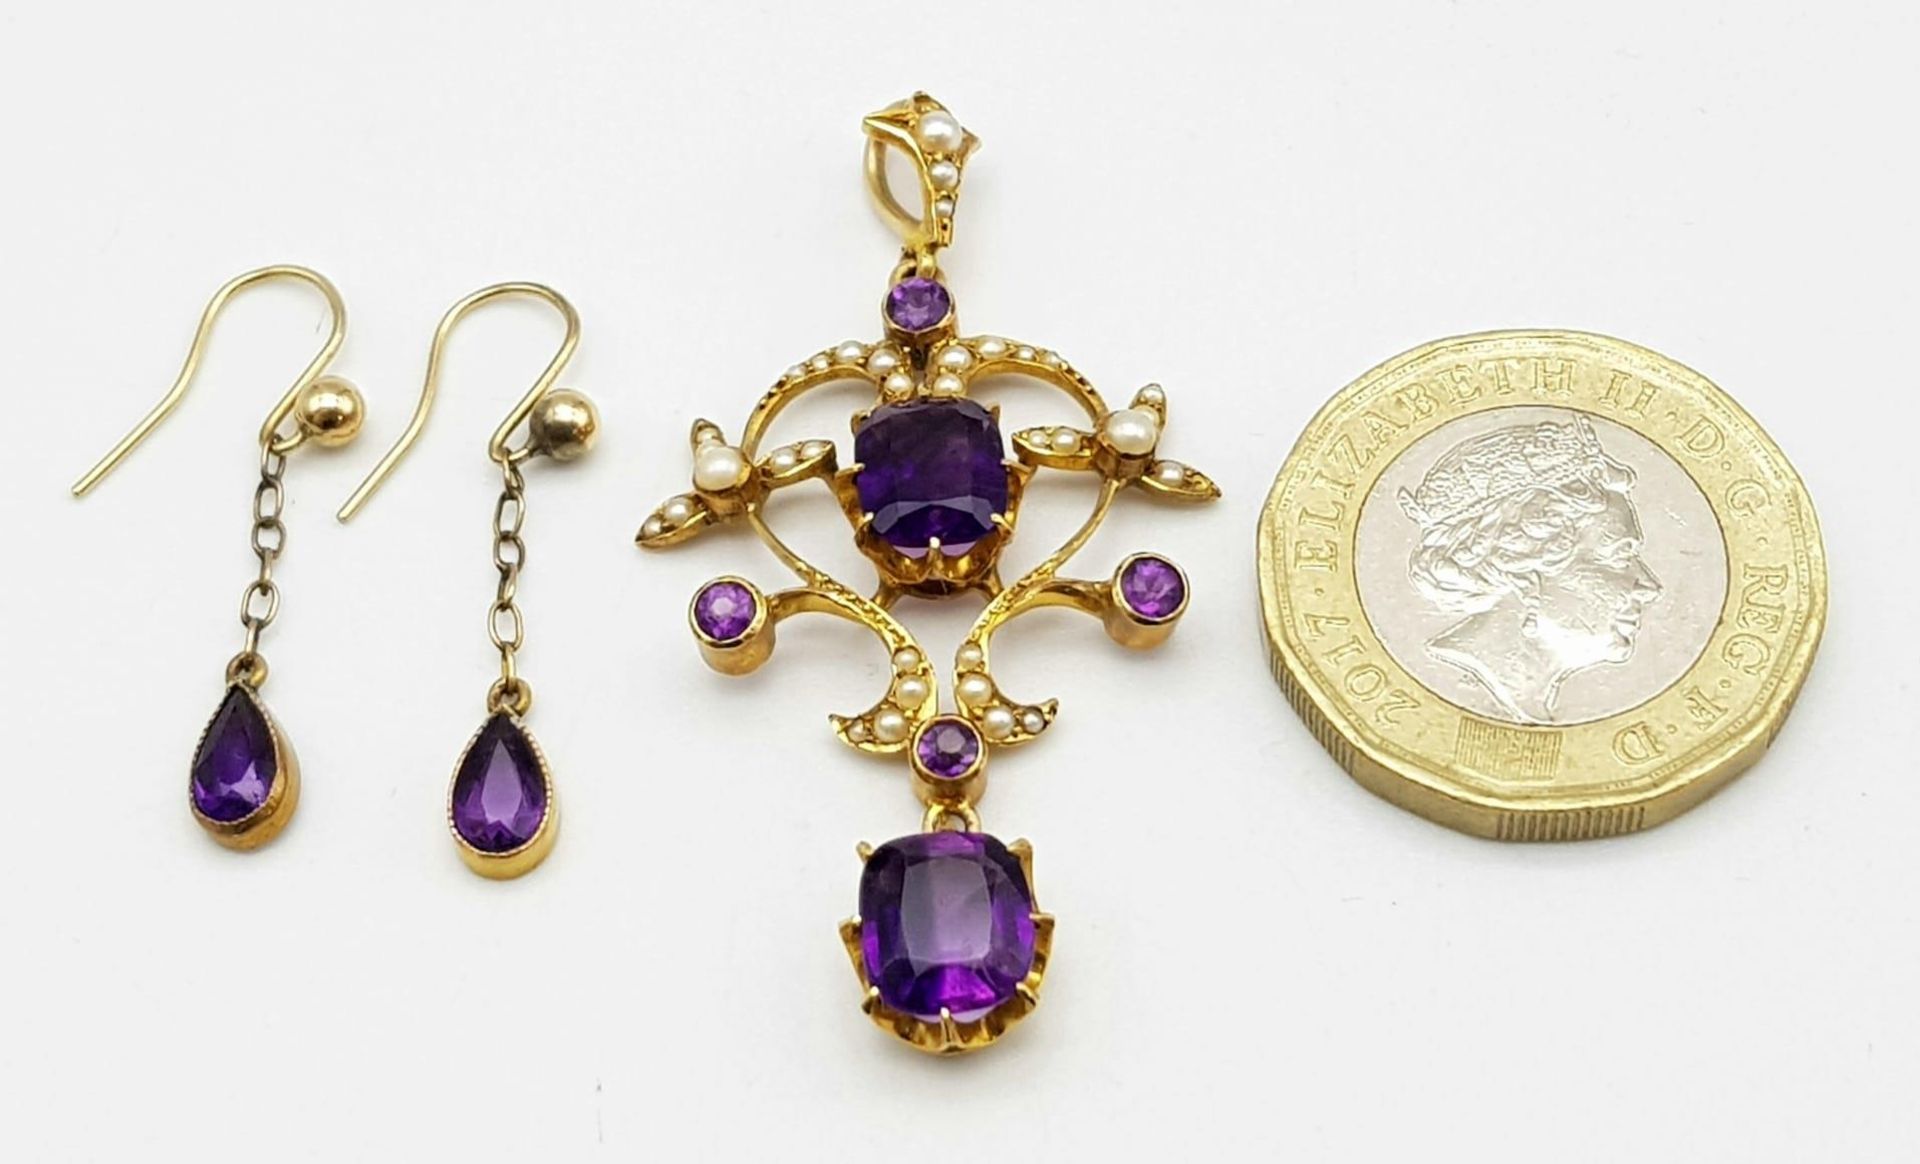 An ART NOUVEAU 9 K yellow gold pendant with vivid coloured amethysts and natural seed pearls, - Image 6 of 7